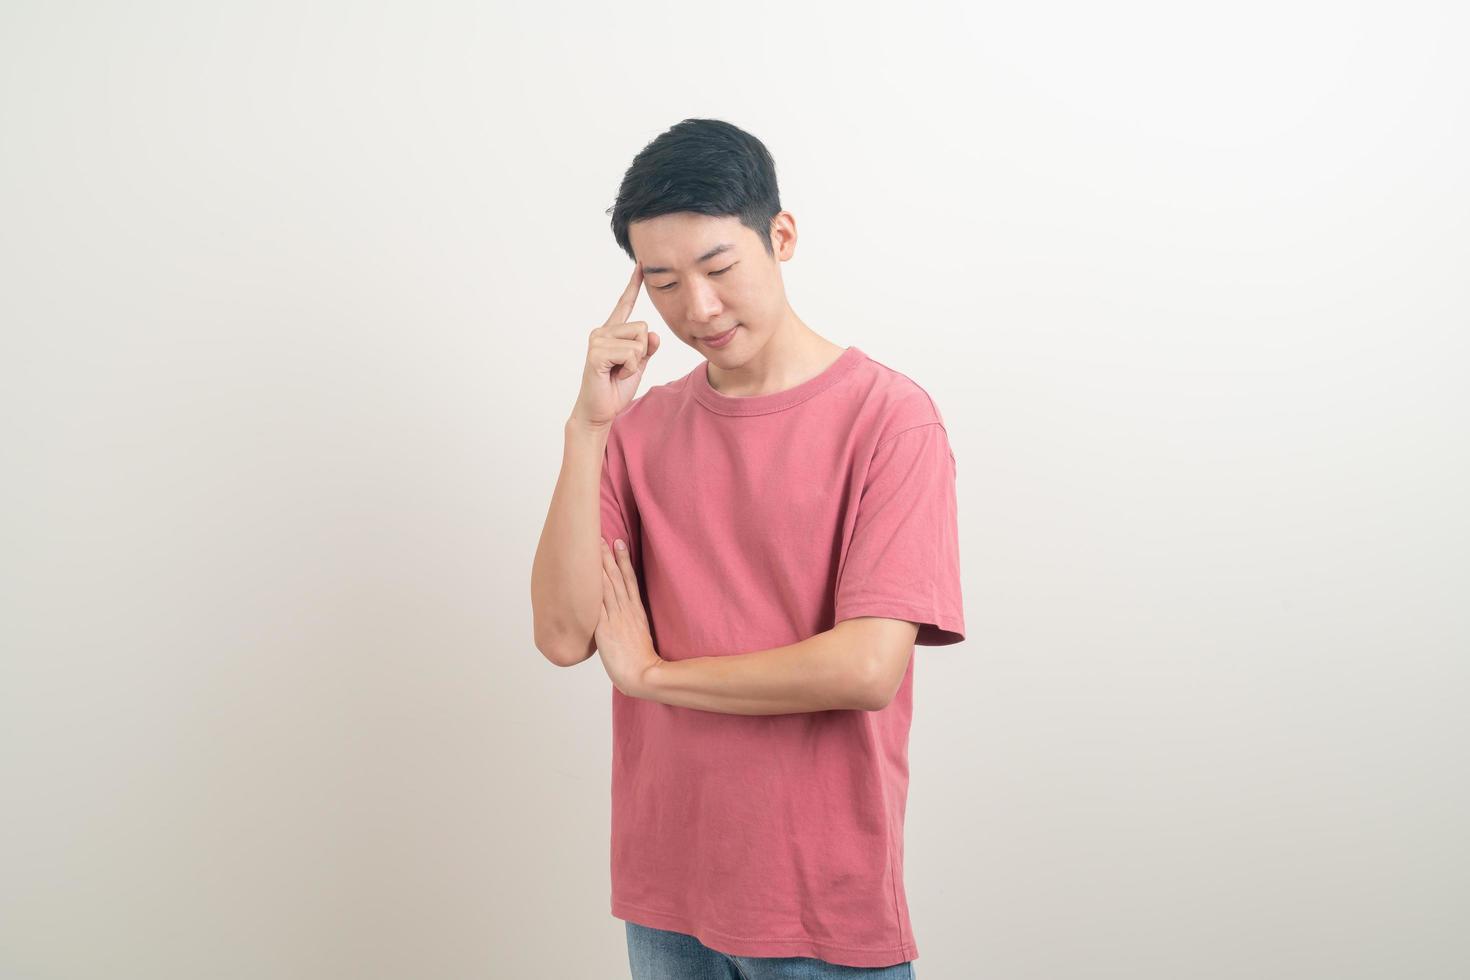 young Asian man thinking on white background photo